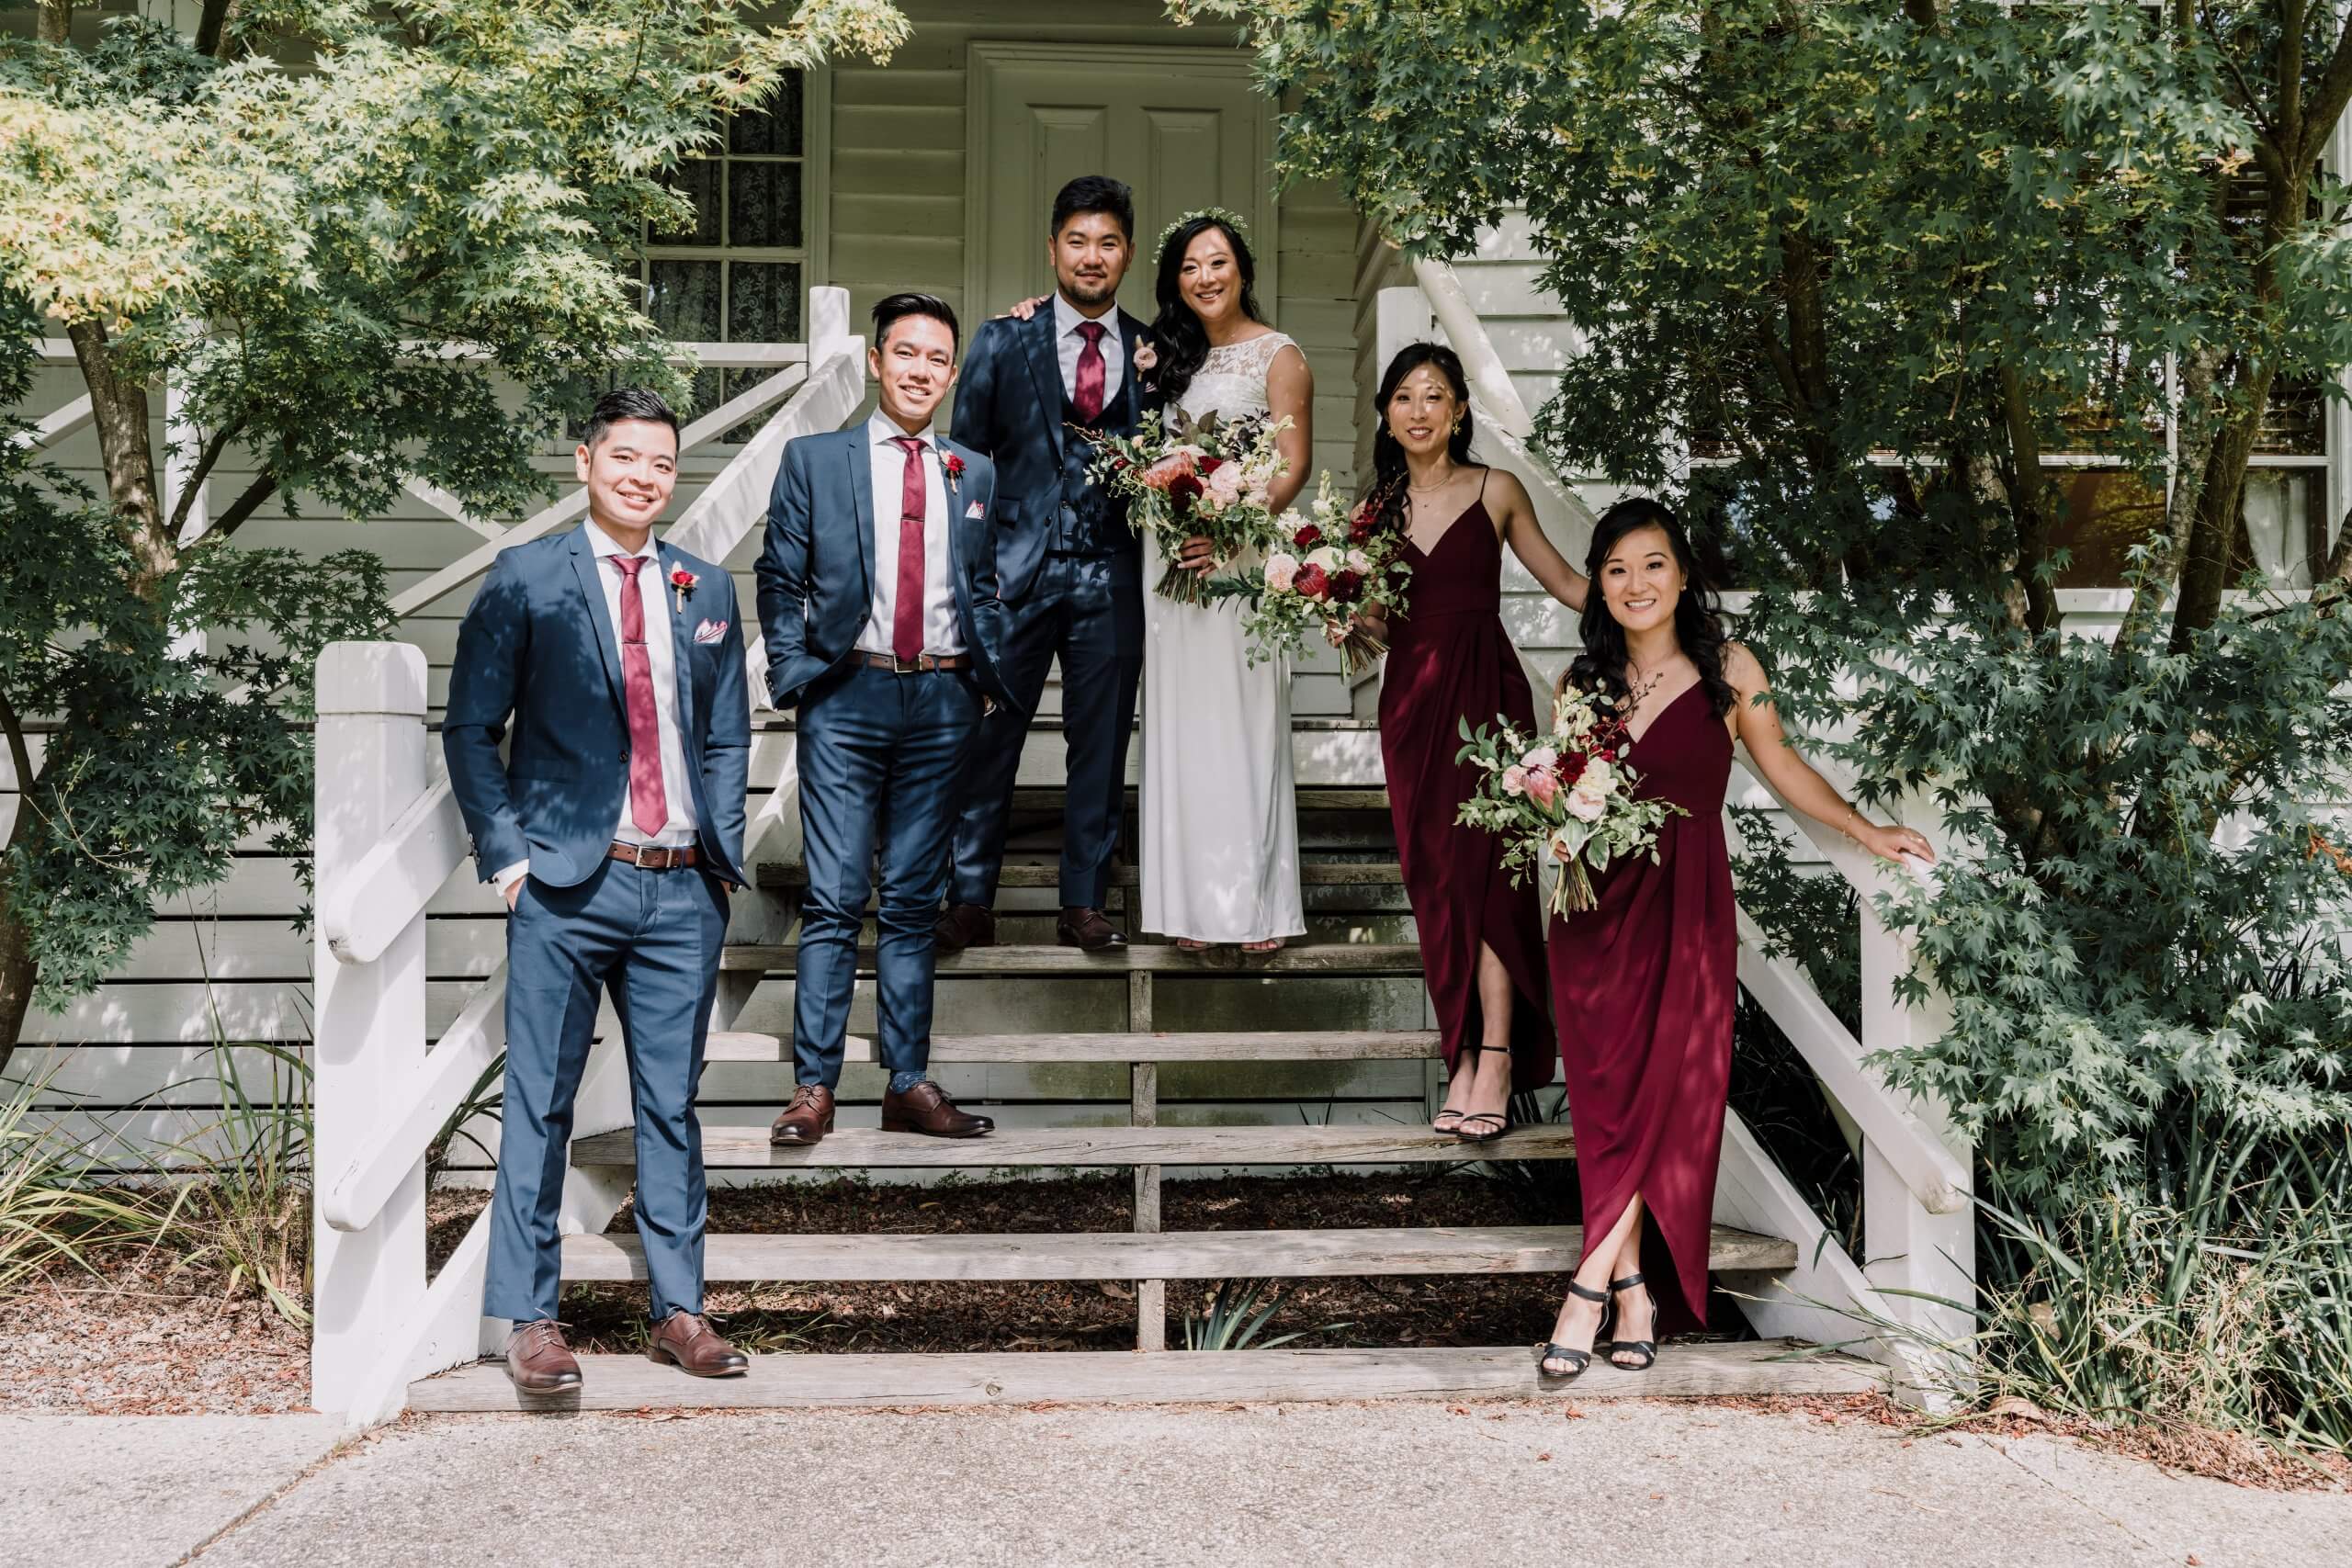 A photo of the bride and groom with two of their bridesmaids and groomsmen who are wearing magenta dresses for the ladies and matching magenta ties for the men.